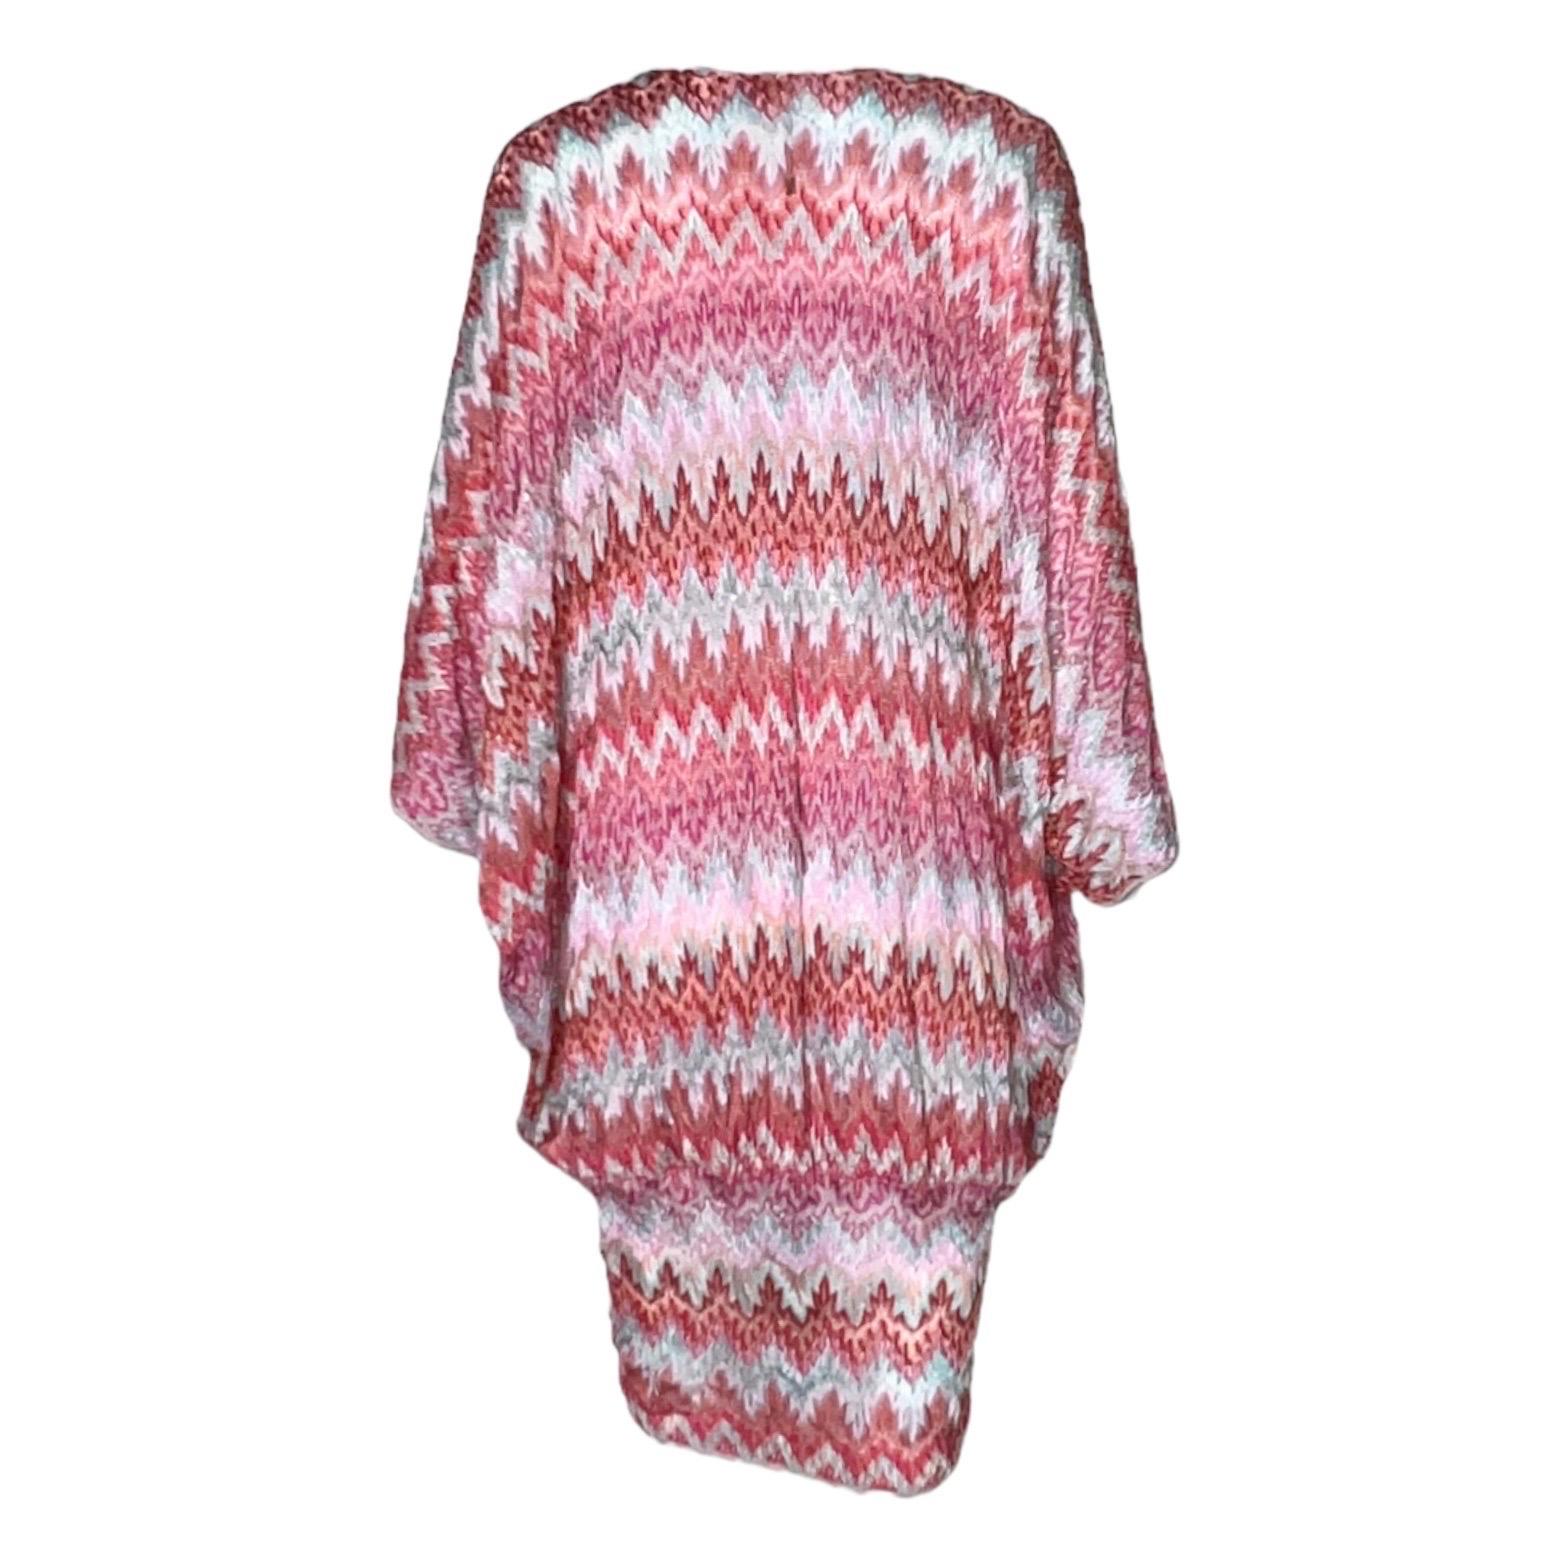 This stunning multicolored Missoni knitted mini dress epitomizes jet-set glamour. The signature geometric weave will update your look in a flash.

DETAILS:

Beautiful multicolor & pink shades
Missoni signature geometric knit weave
V-neck
Bow-tie